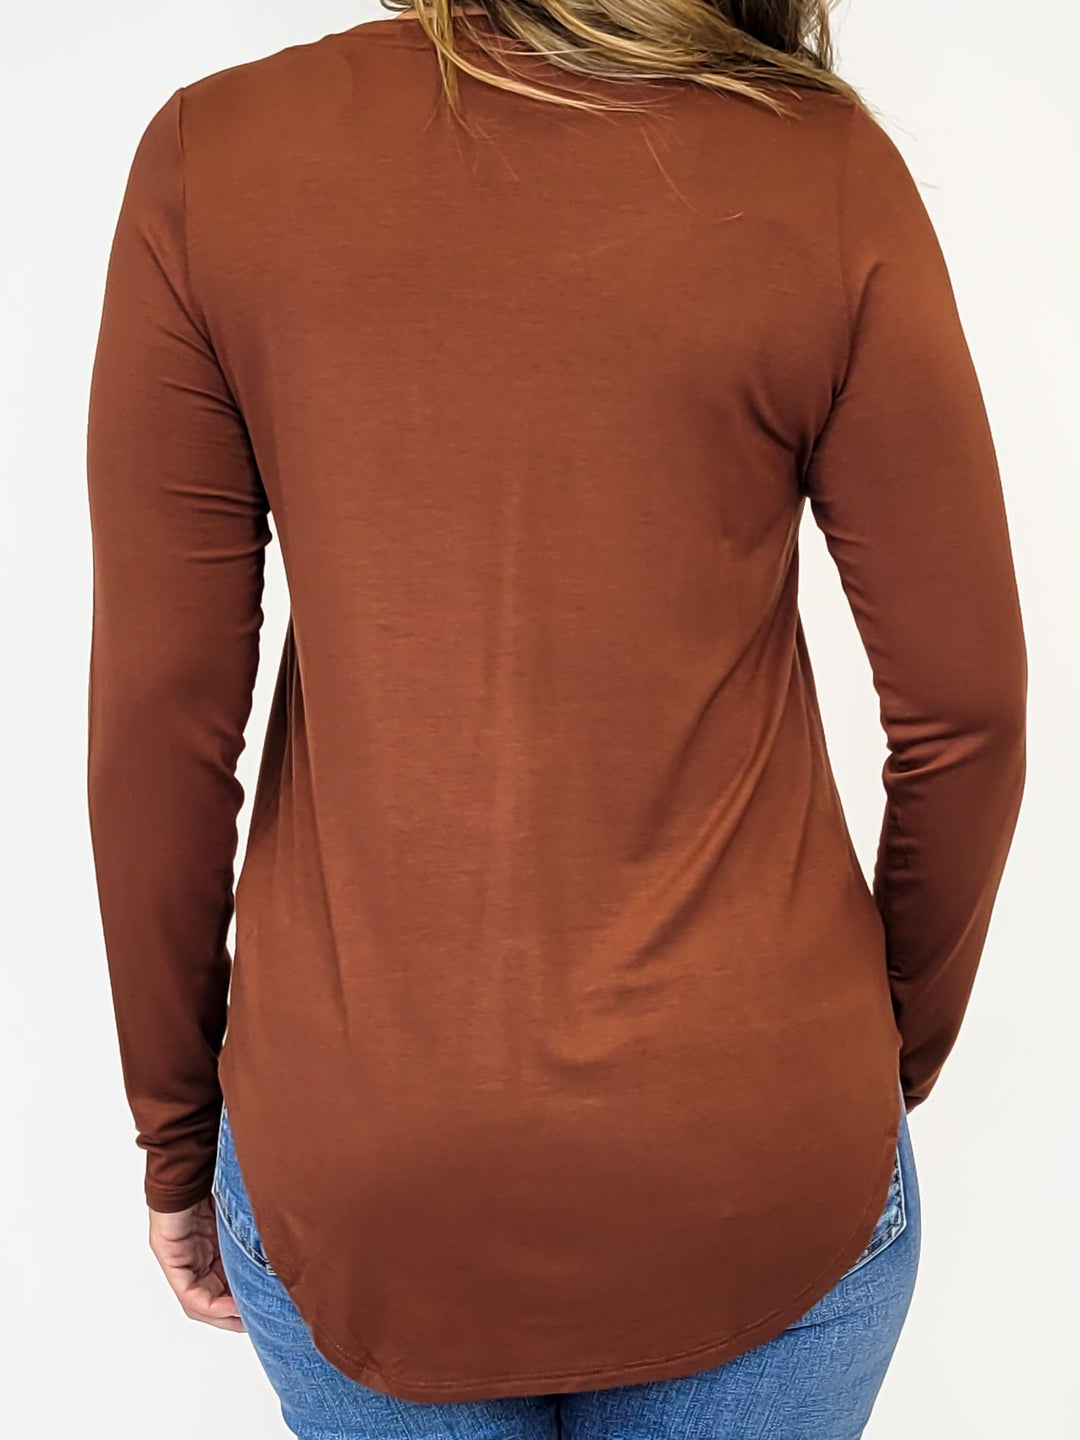 SOLID RUST LONG SLEEVE HIGH LOW TOP